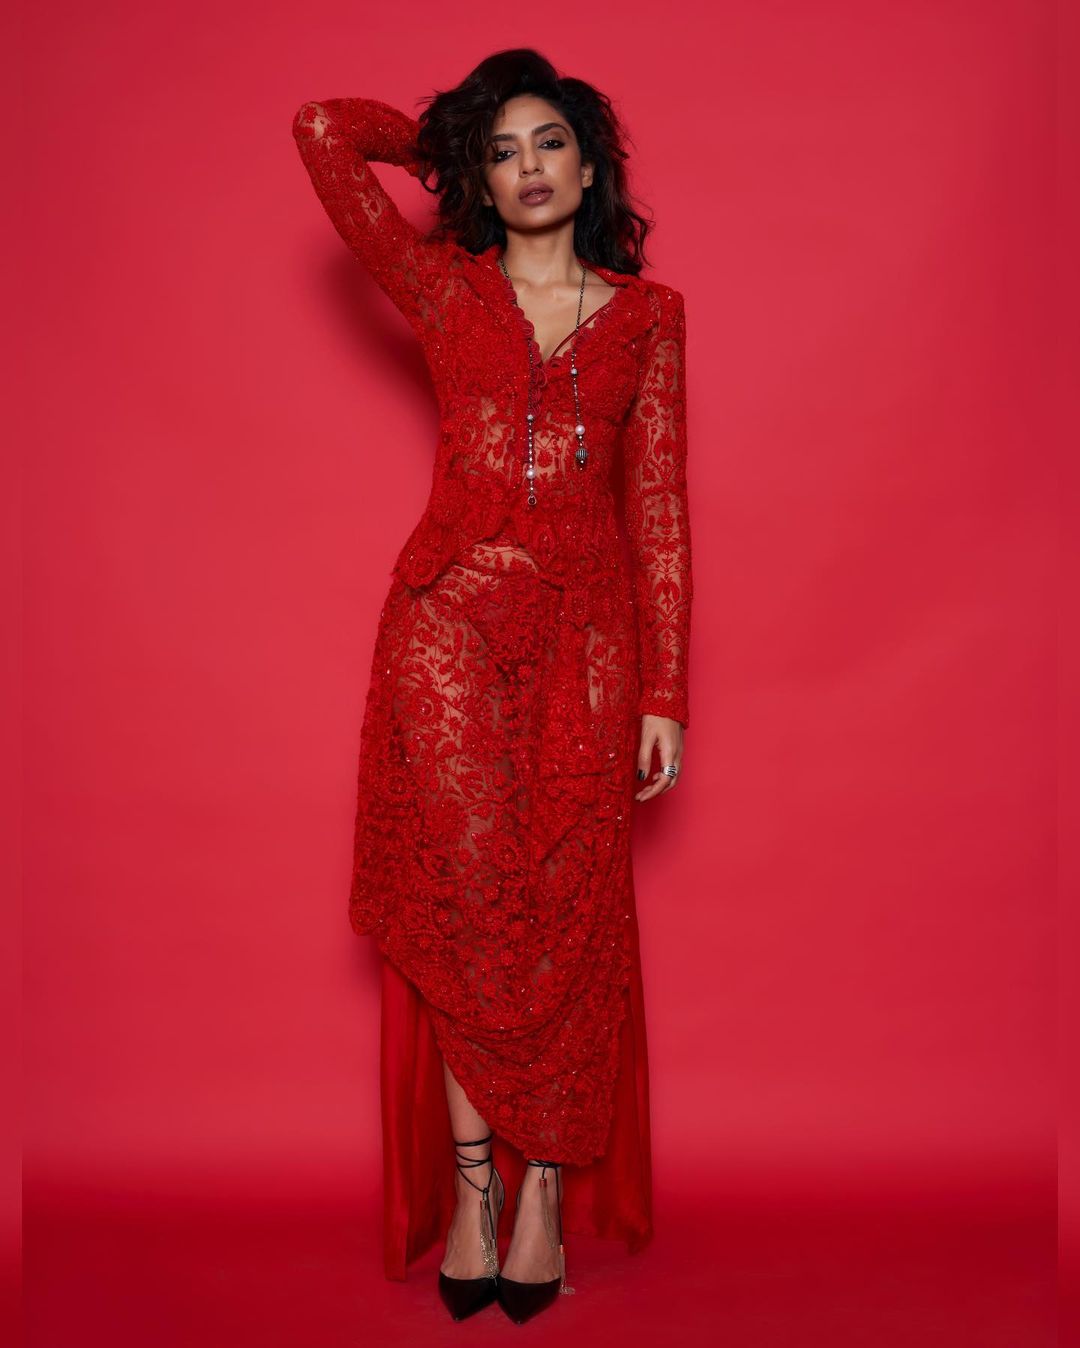 Sobhita Dhulipala looks regal in a lace red dress. 